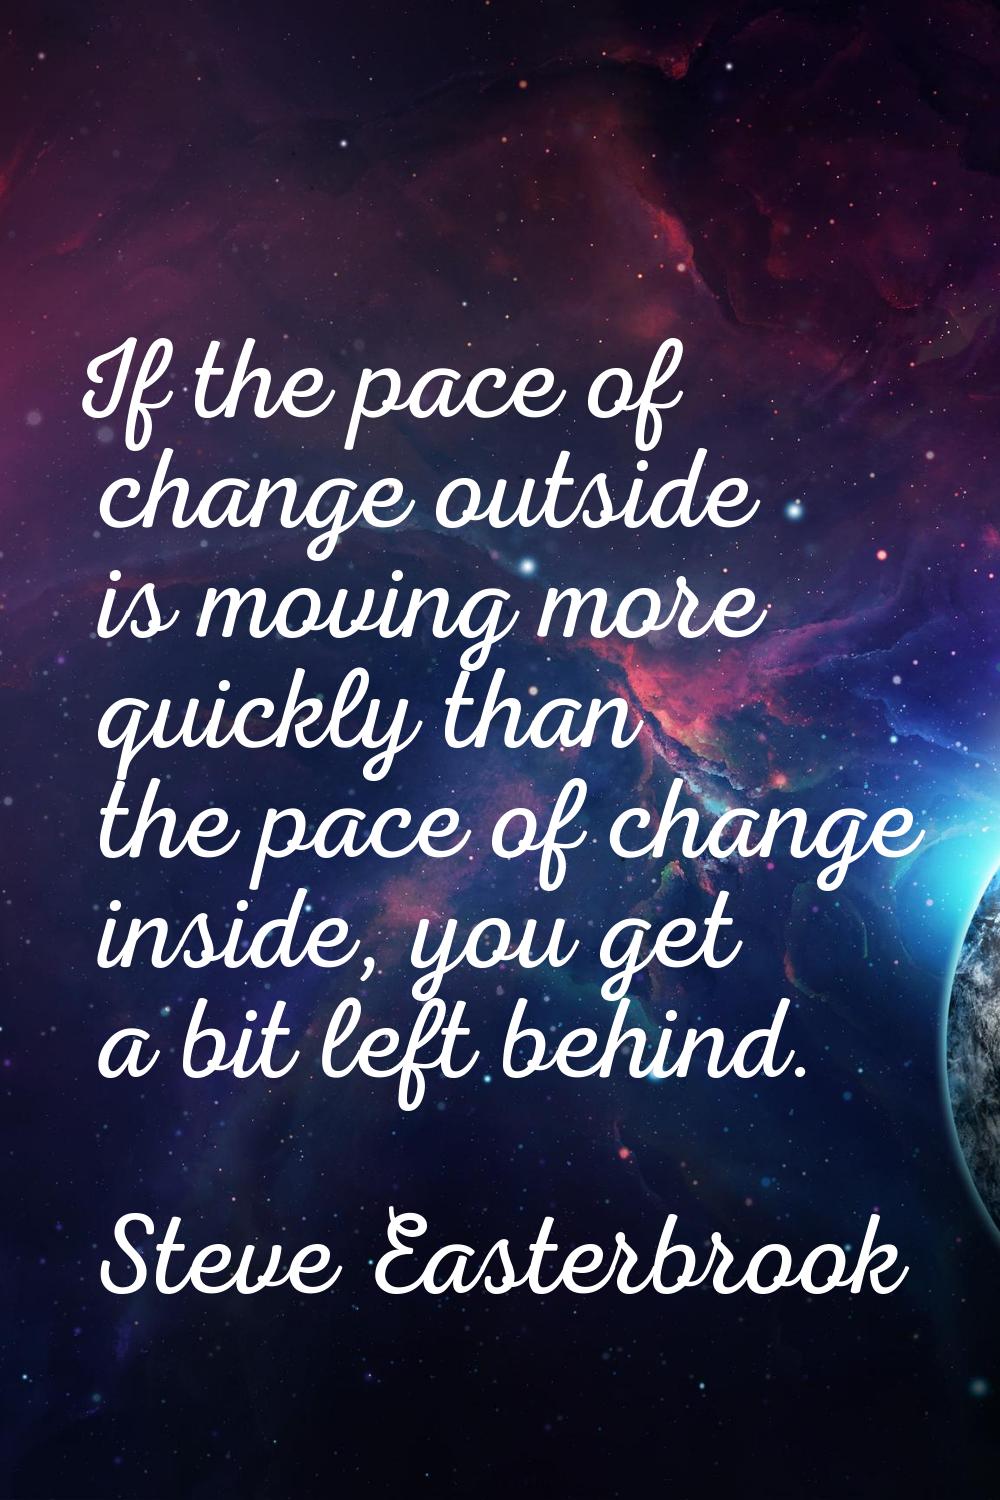 If the pace of change outside is moving more quickly than the pace of change inside, you get a bit 